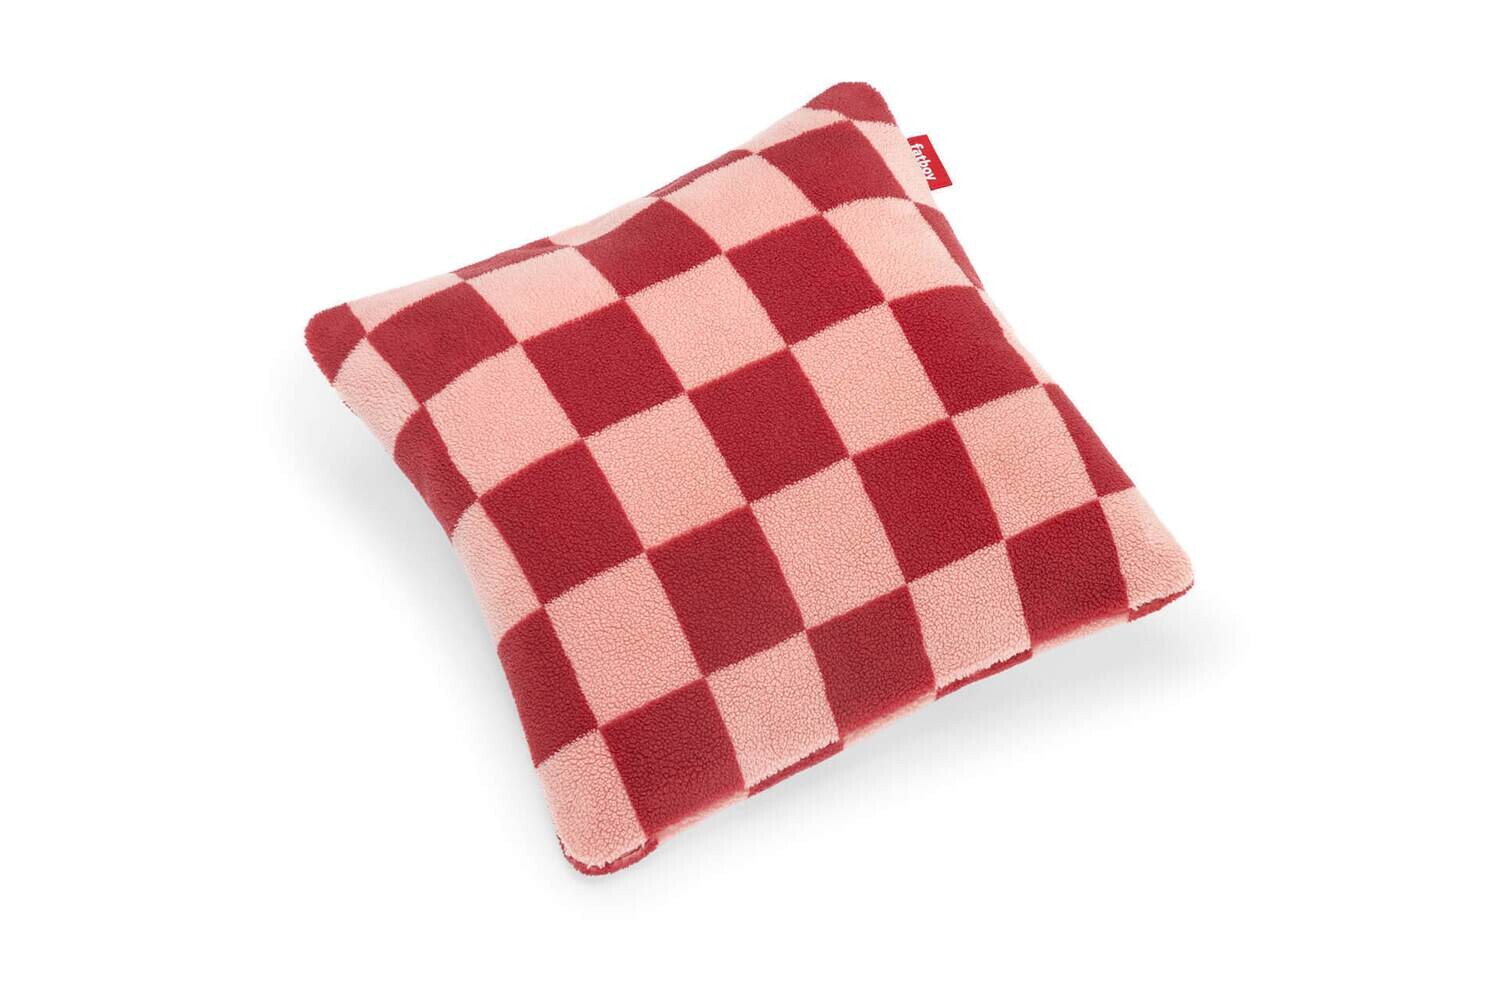 Fatboy square pillow teddy chess red